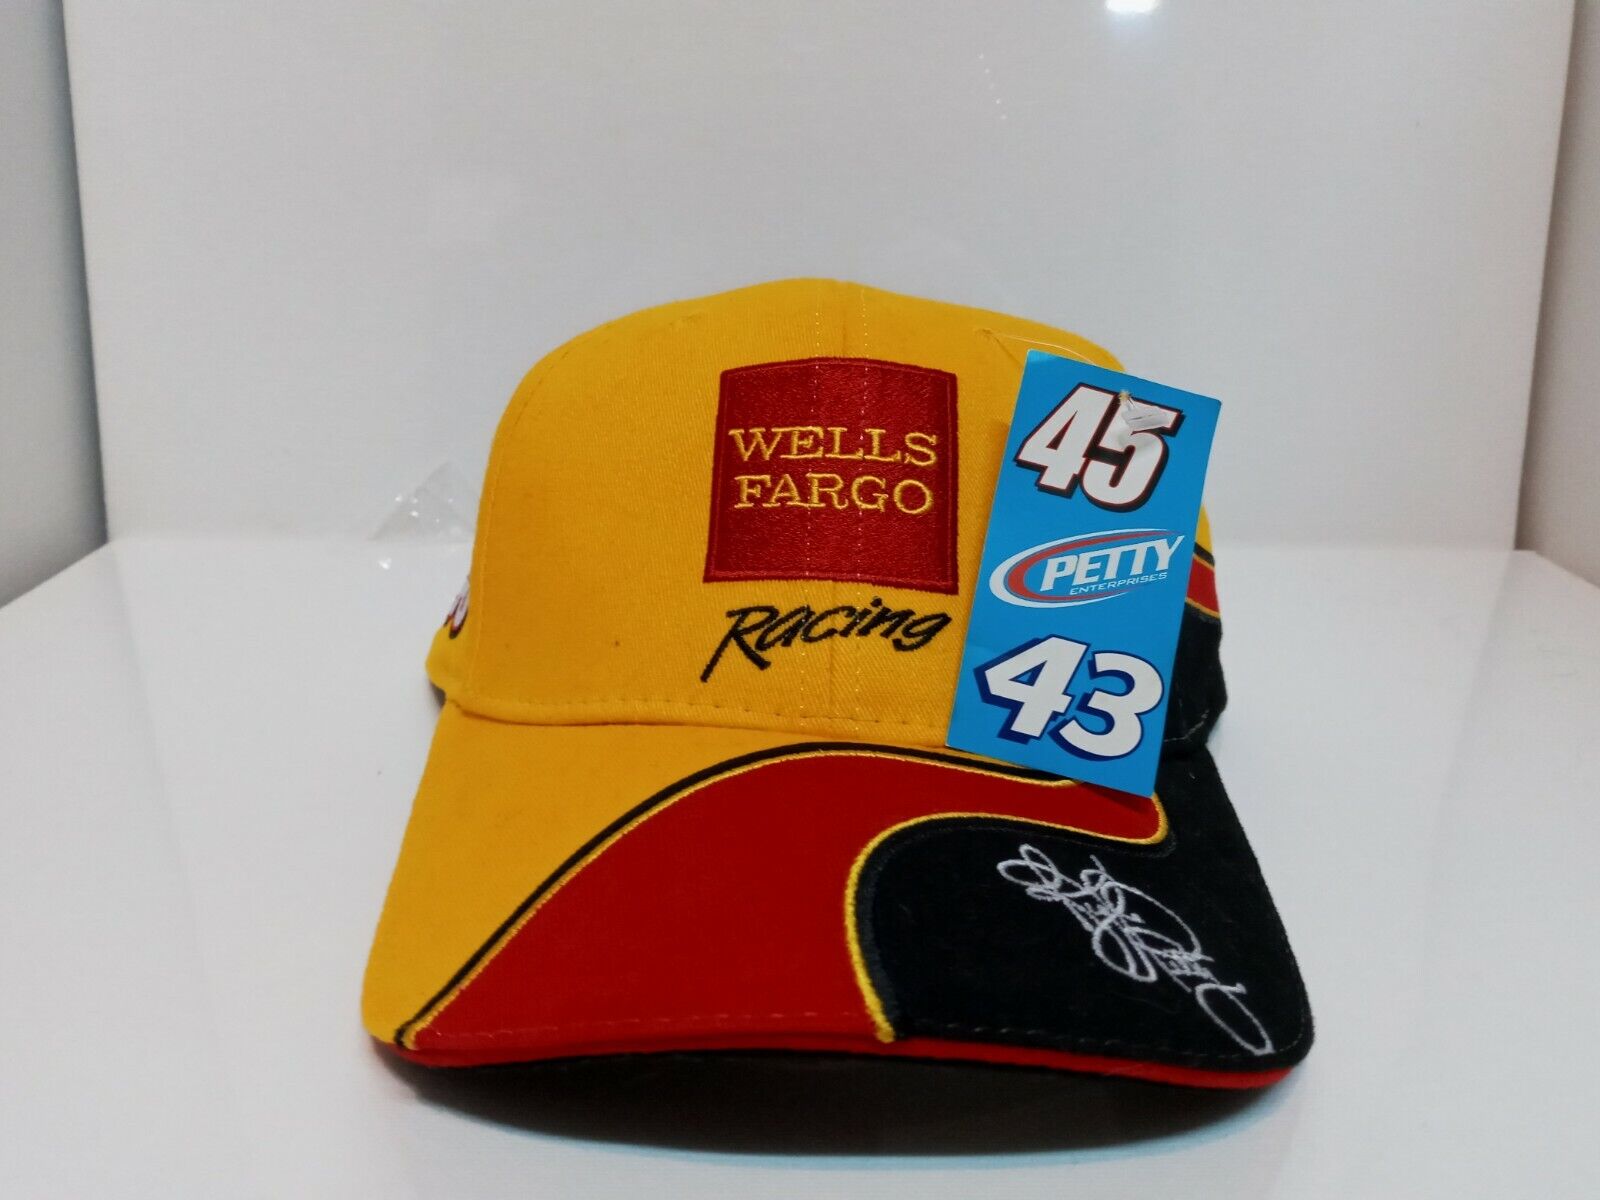 Nascar Kyle Petty #45 Wells Fargo Racing Hat Yellow Red Black Osfm New With Tags